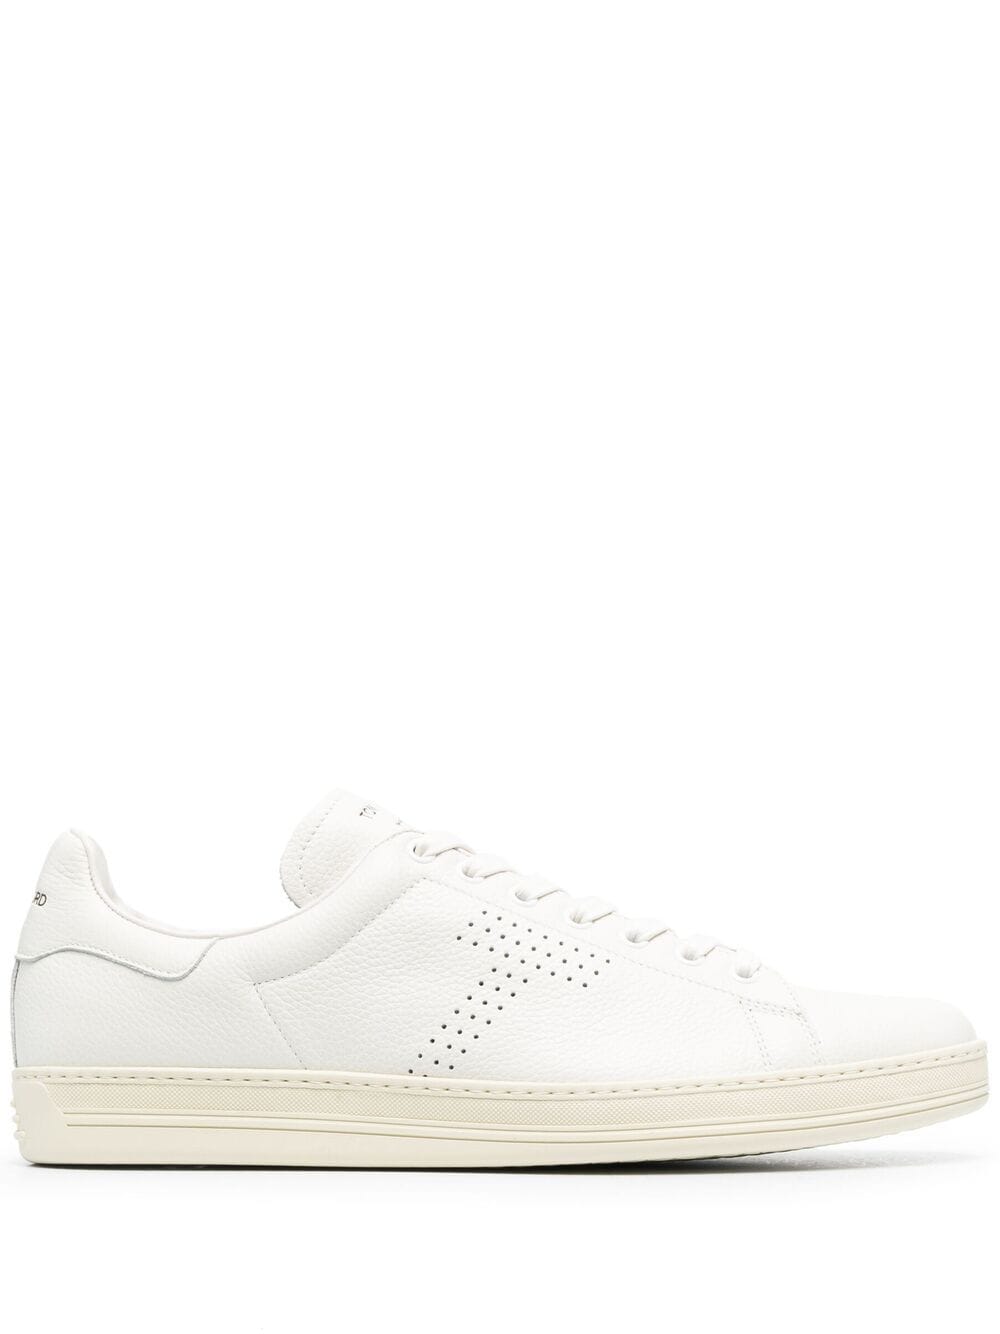 TOM FORD Warwick Grained Leather Sneakers White